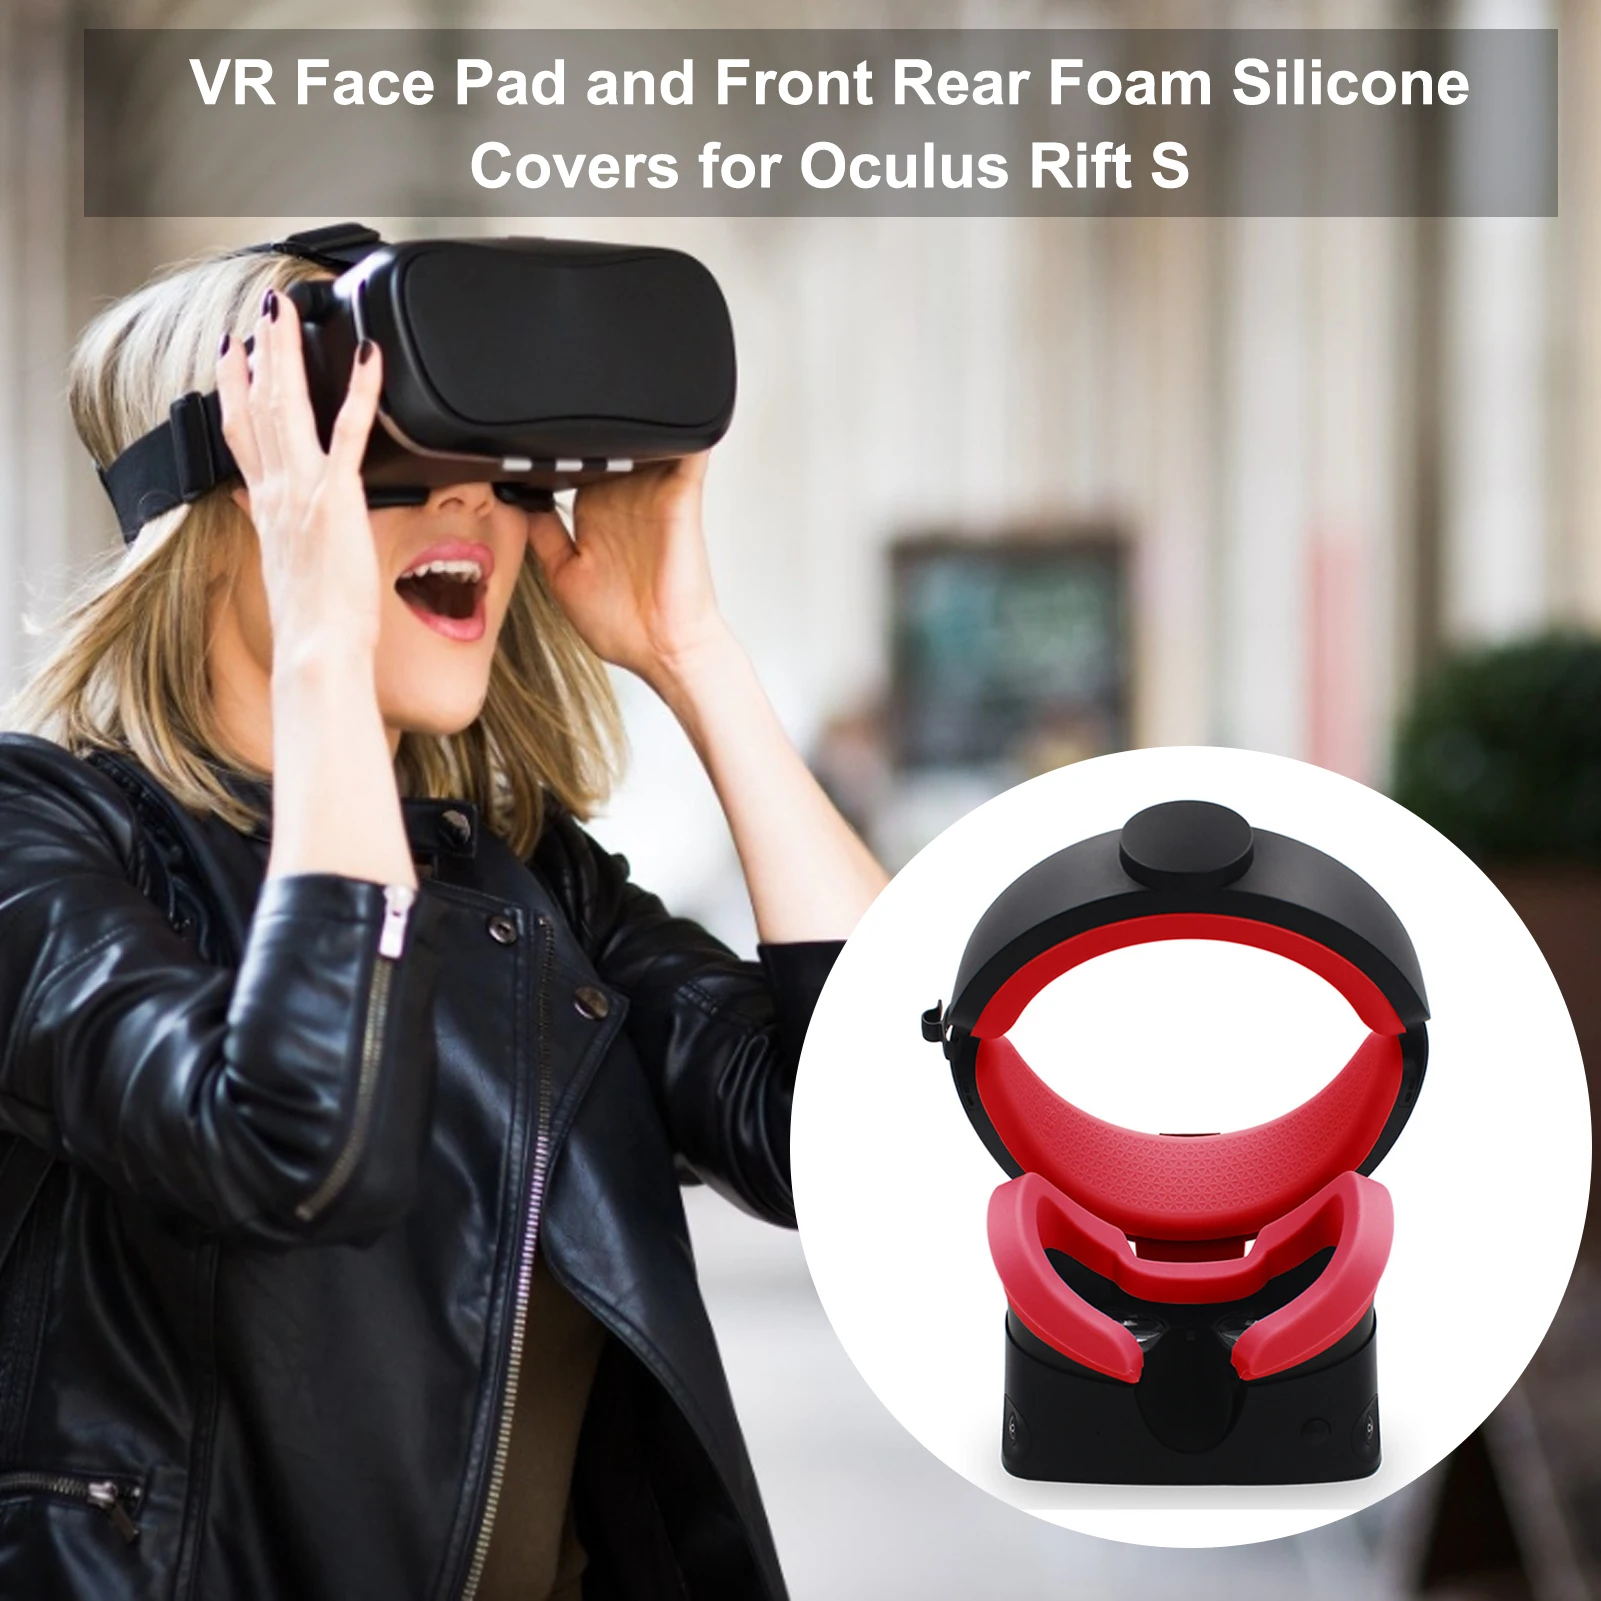 3 In1 VR Face Pad &Front Rear Foam Silicone Covers For Oculus Rift S VR Glasses Eye Mask Face Mask Skin Rift S Accessories HOT!